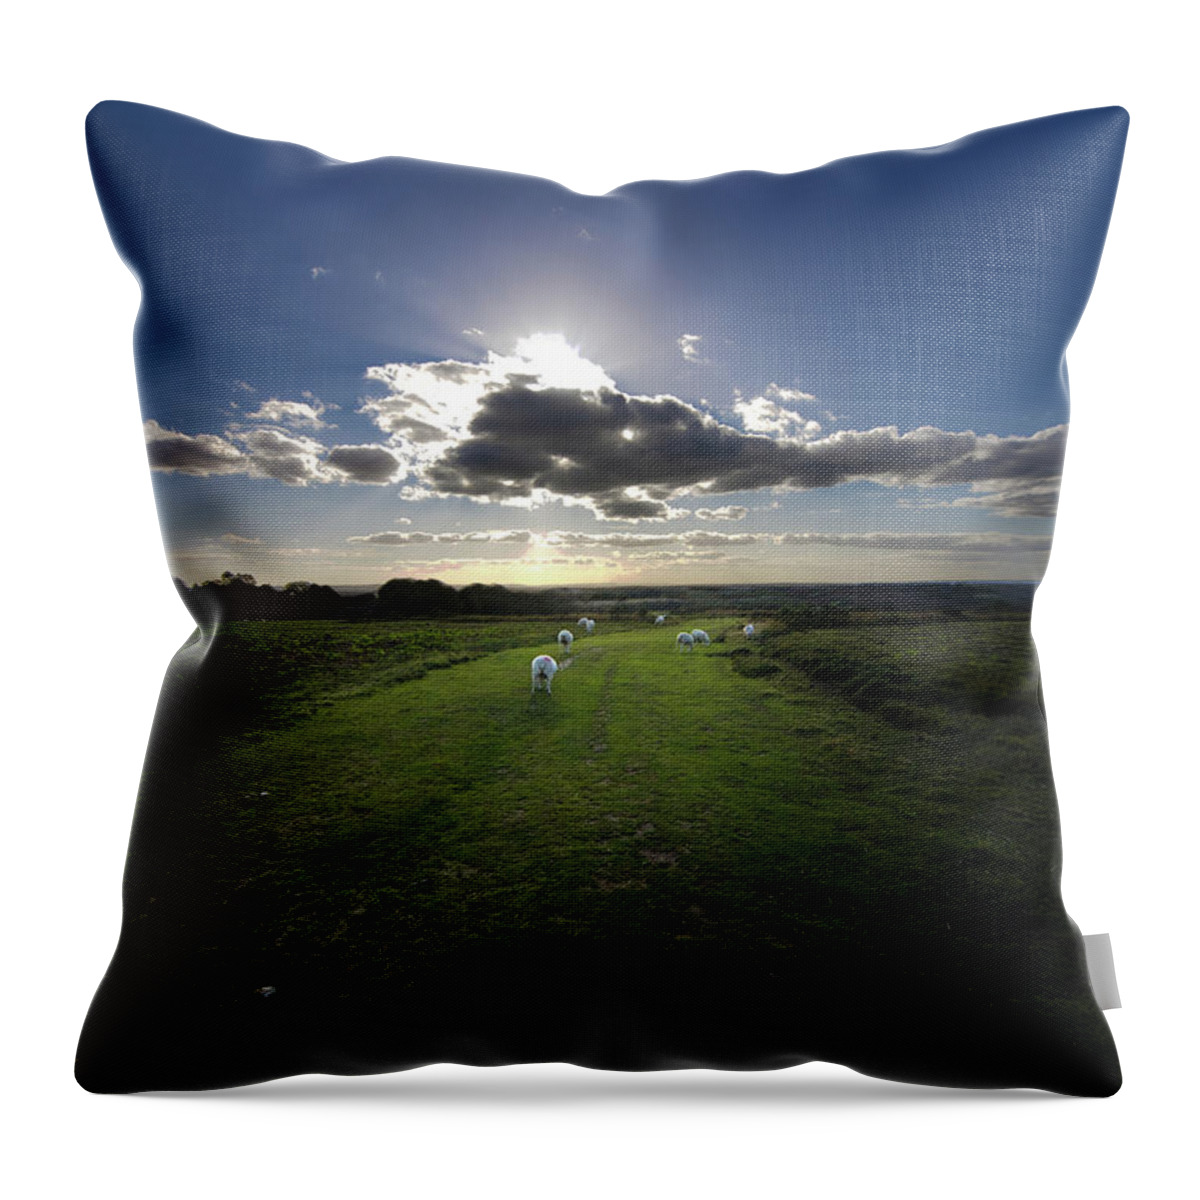 Scenics Throw Pillow featuring the photograph The Sheep Are Always The Last To Leave by James Galpin